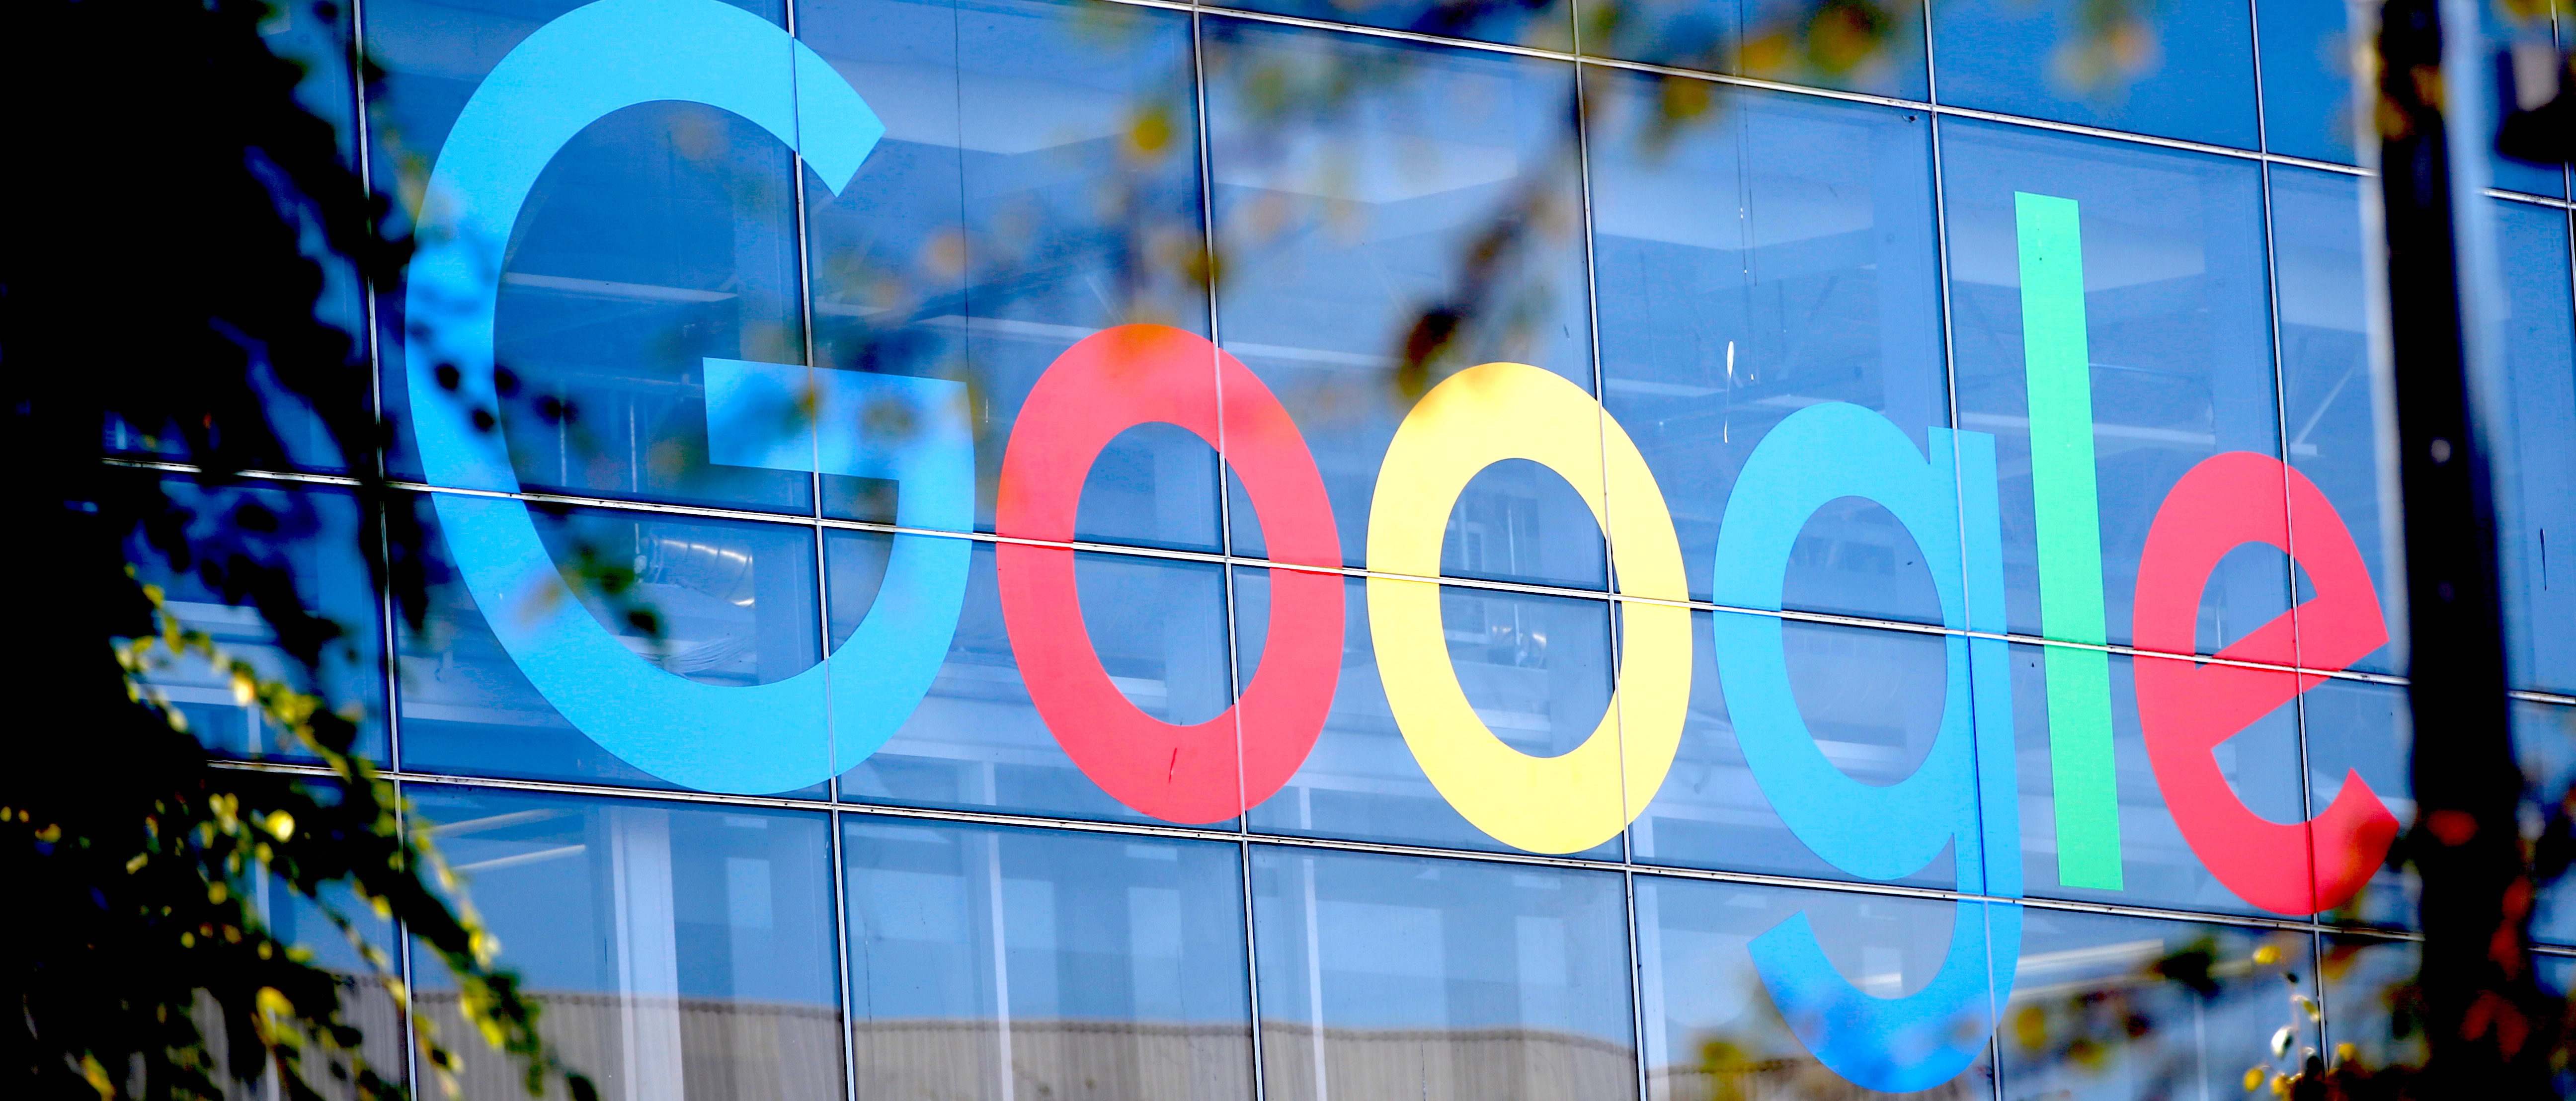 A Google logo is seen at the company's headquarters in Mountain View, California, U.S., November 1, 2018. REUTERS/ Stephen Lam